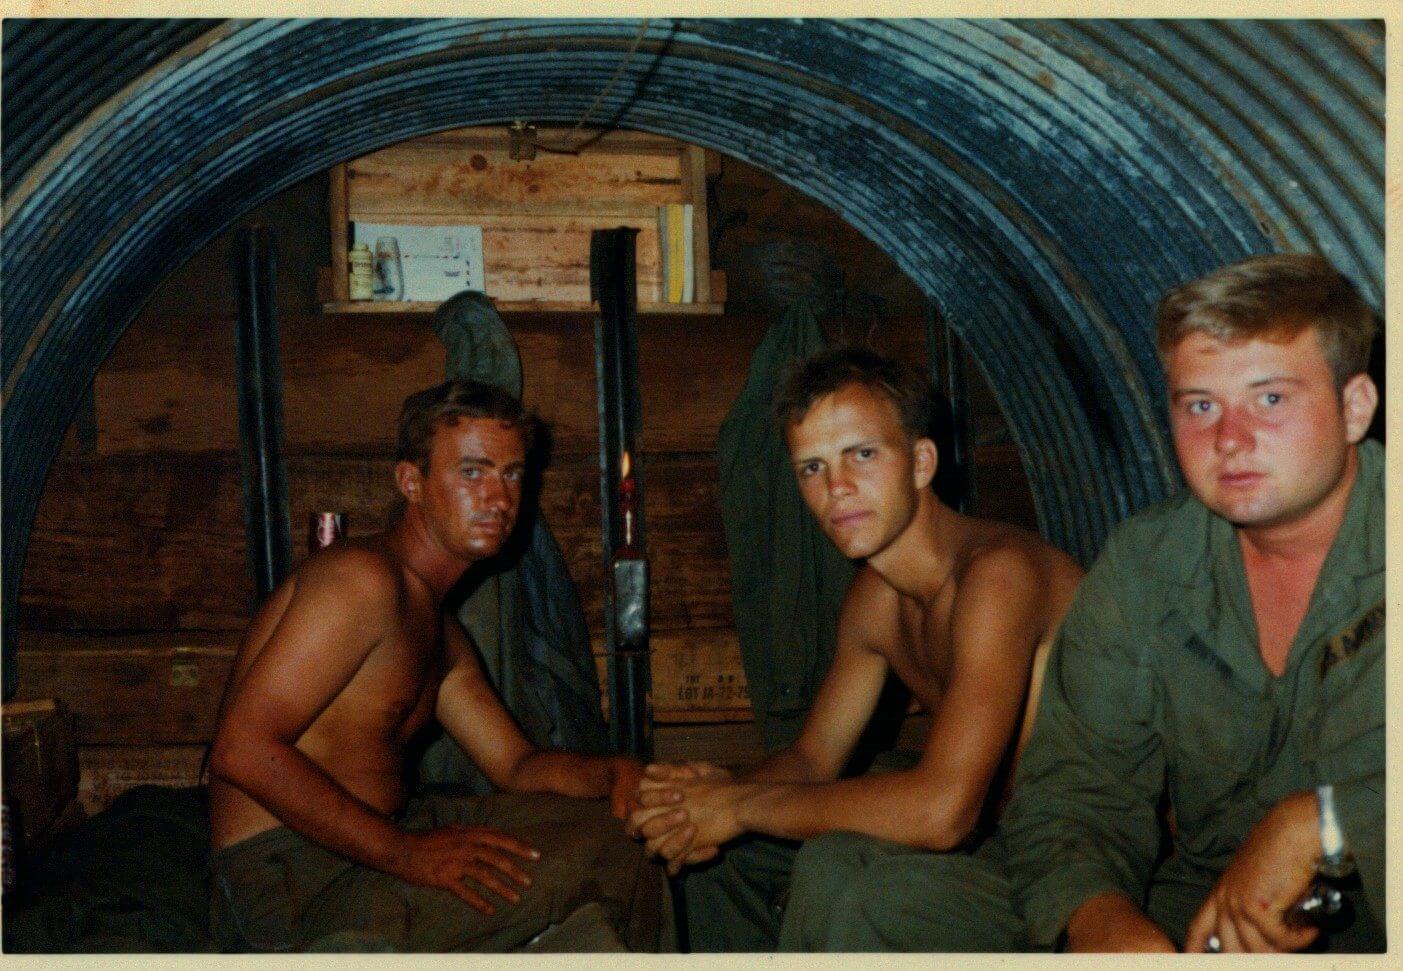 Three soldiers sitting inside a bunker, looking serious.